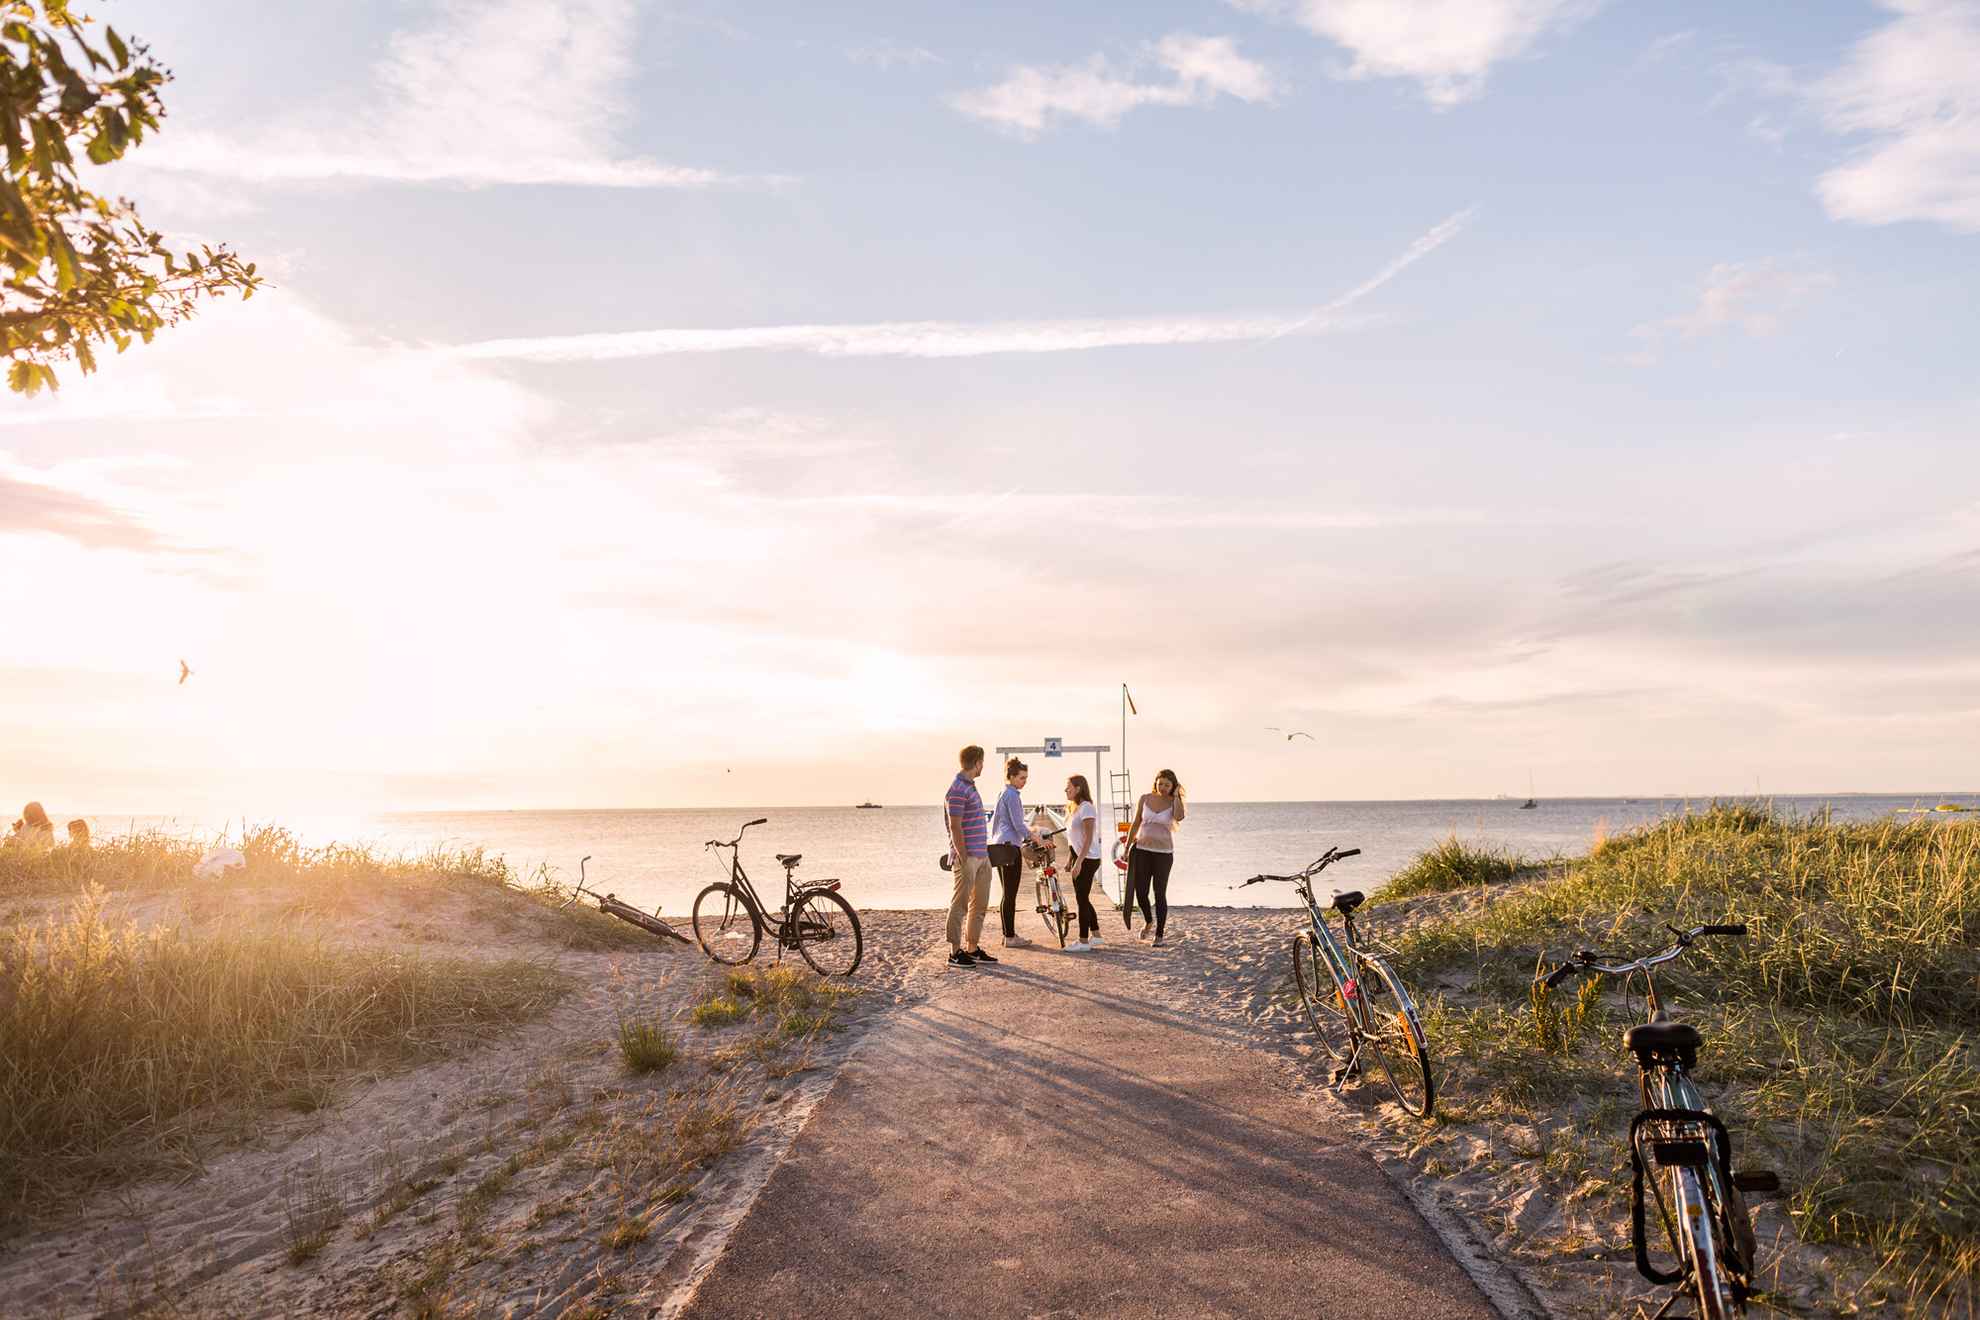 Sunset at Ribersborg beach, a man and three women is seen at a bathing pier at the beach. There are server bikes parked along the path to the beach.